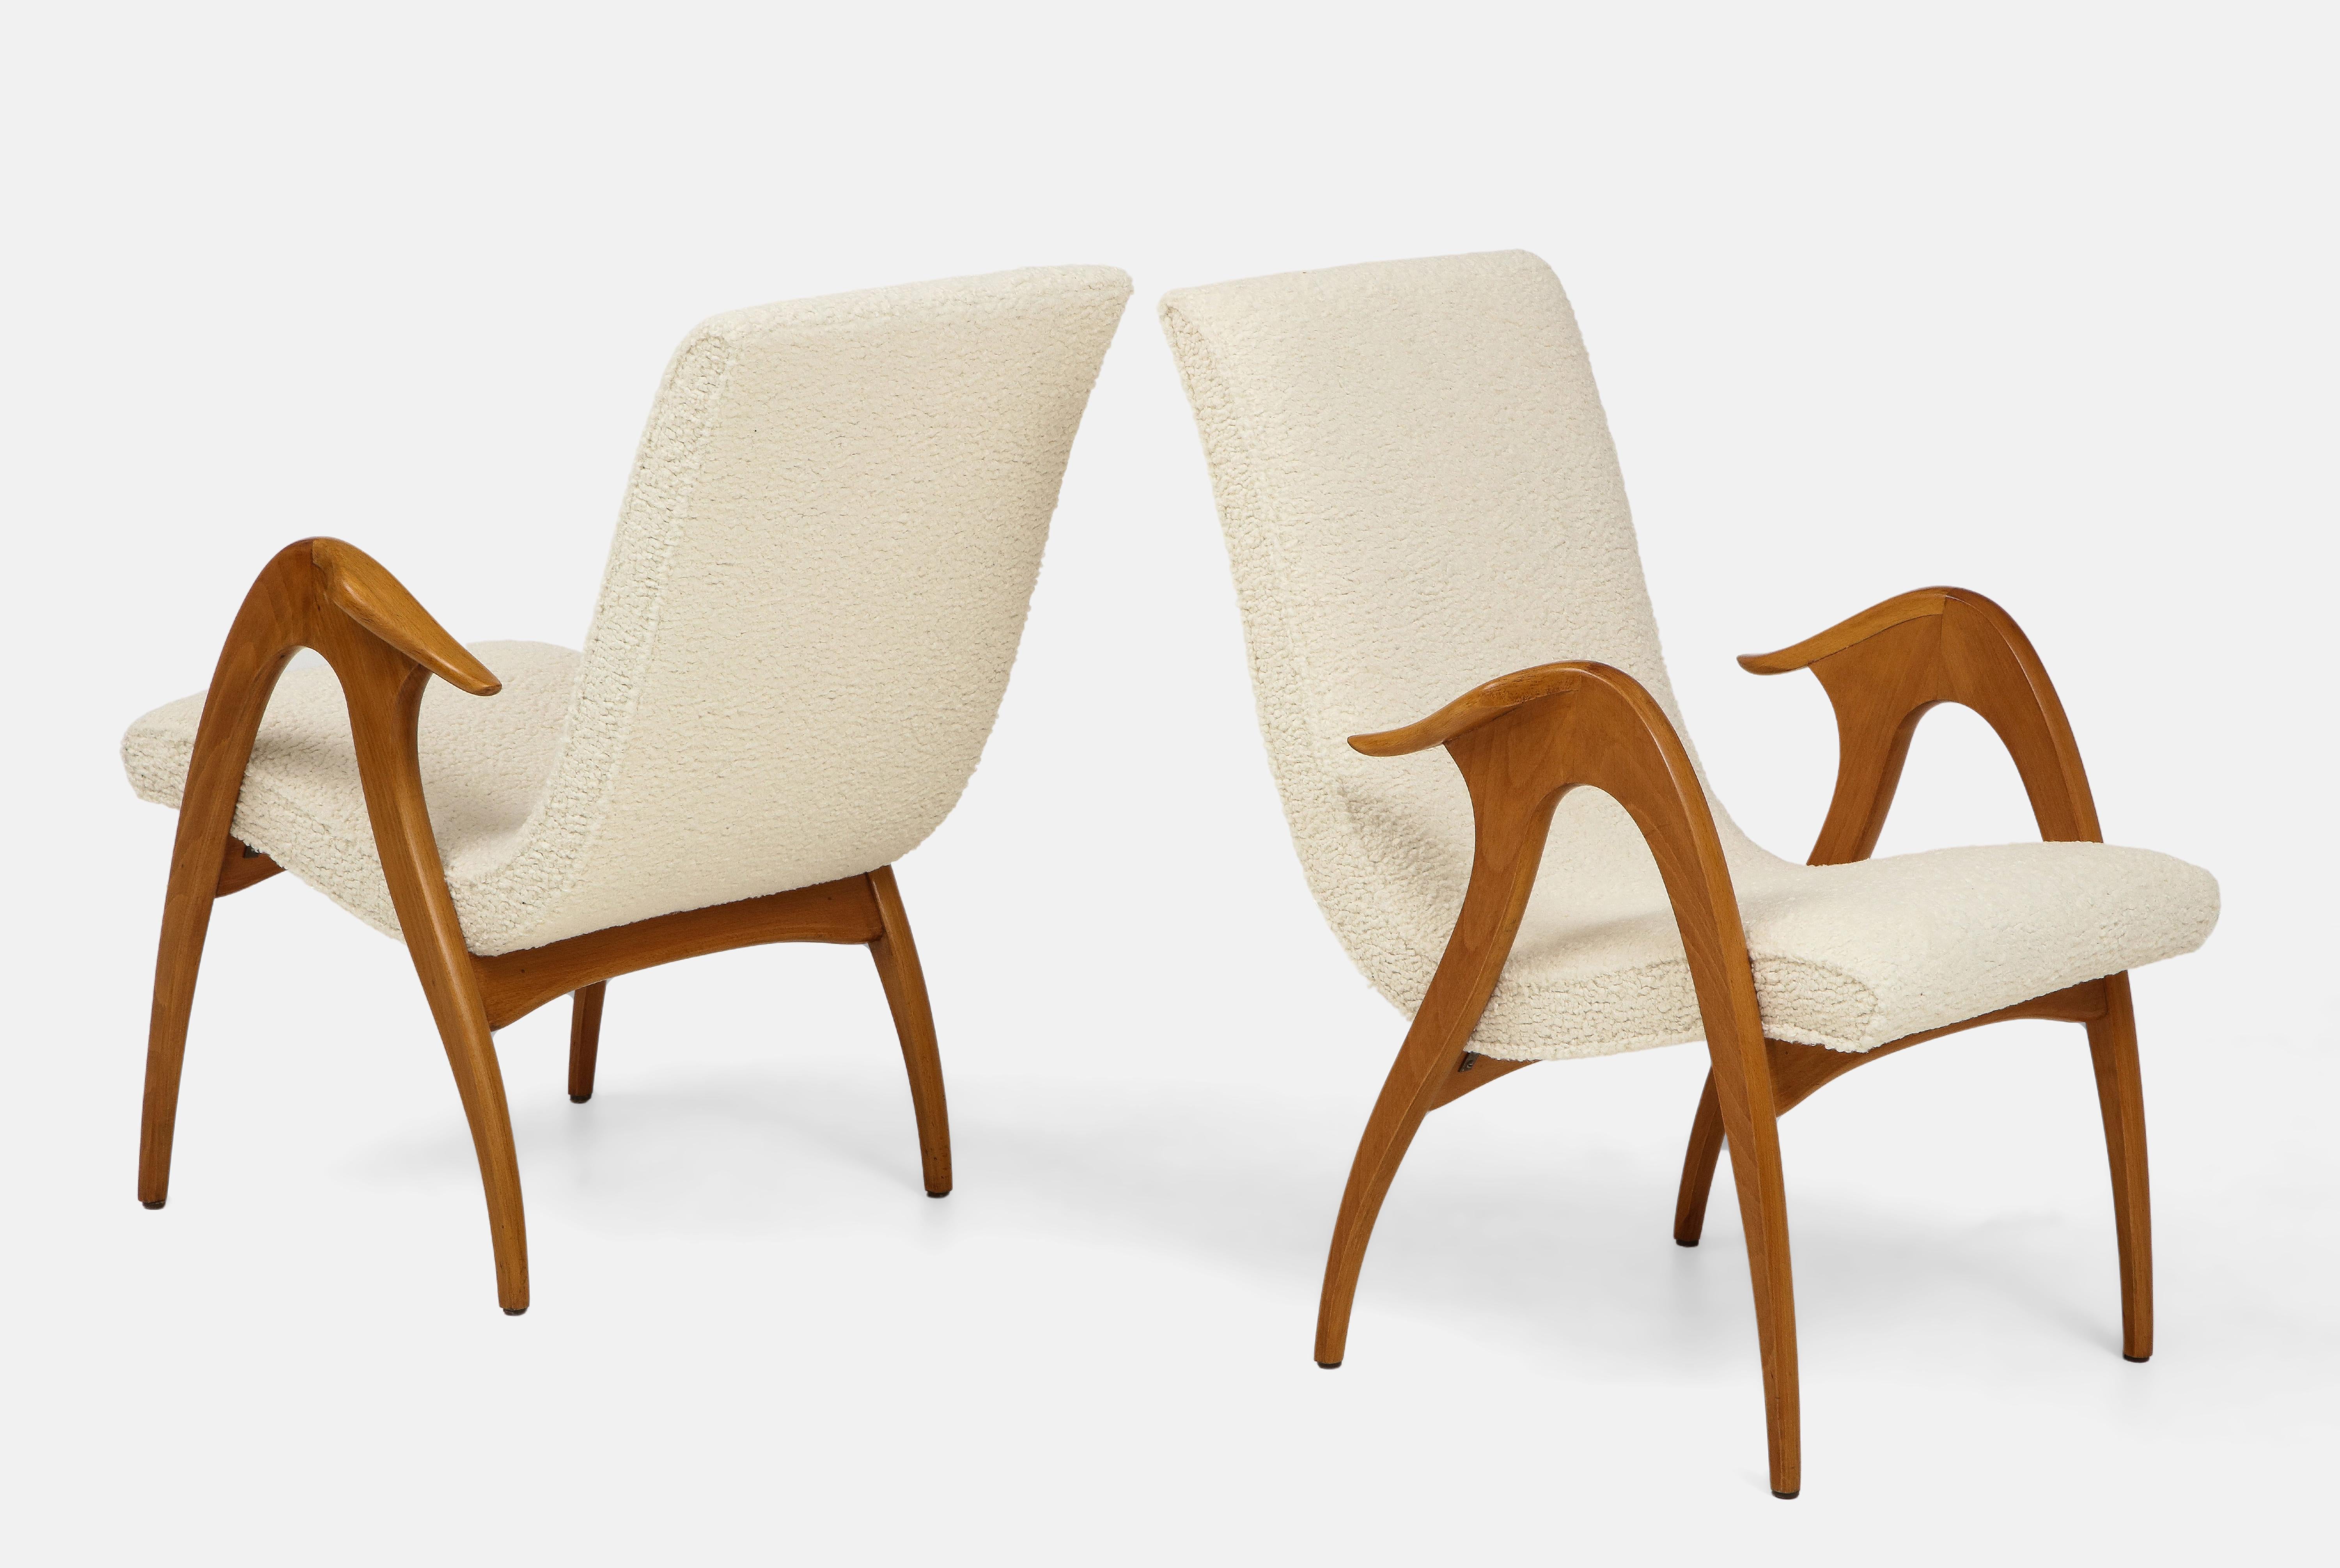 Malatesta and Mason pair of sculptural armchairs consisting of ivory bouclé upholstered curved high backs and seats and figural wood arms and legs. These organically sinuous armchairs exemplify the craftsmanship and originality of mid-century modern